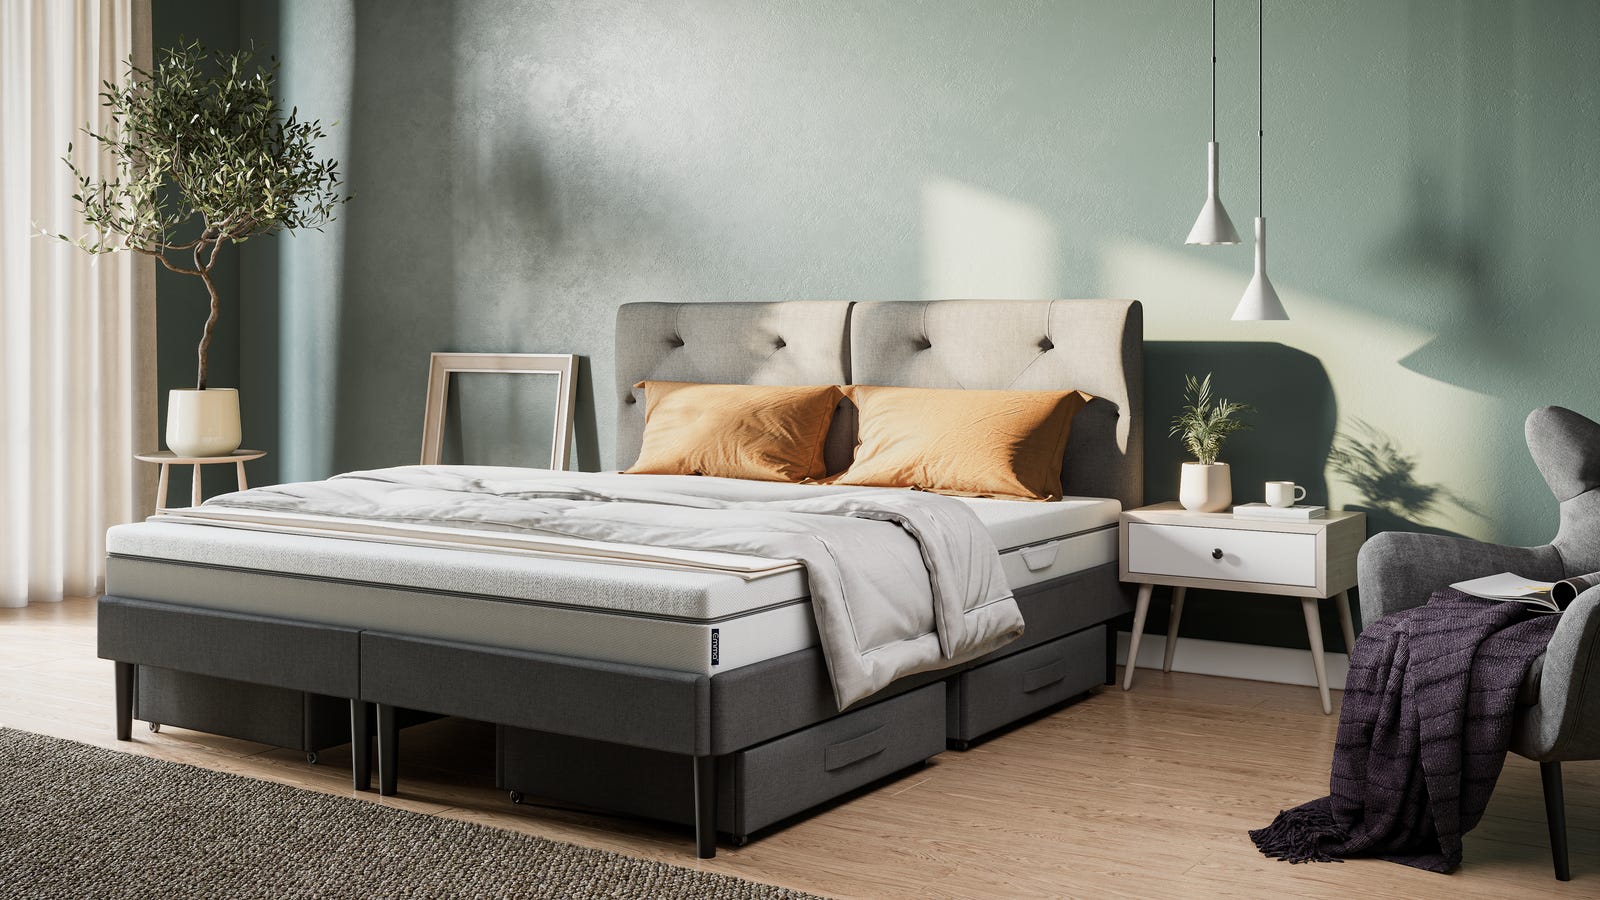 Emma Signature Bed - Tailor-made comfort.